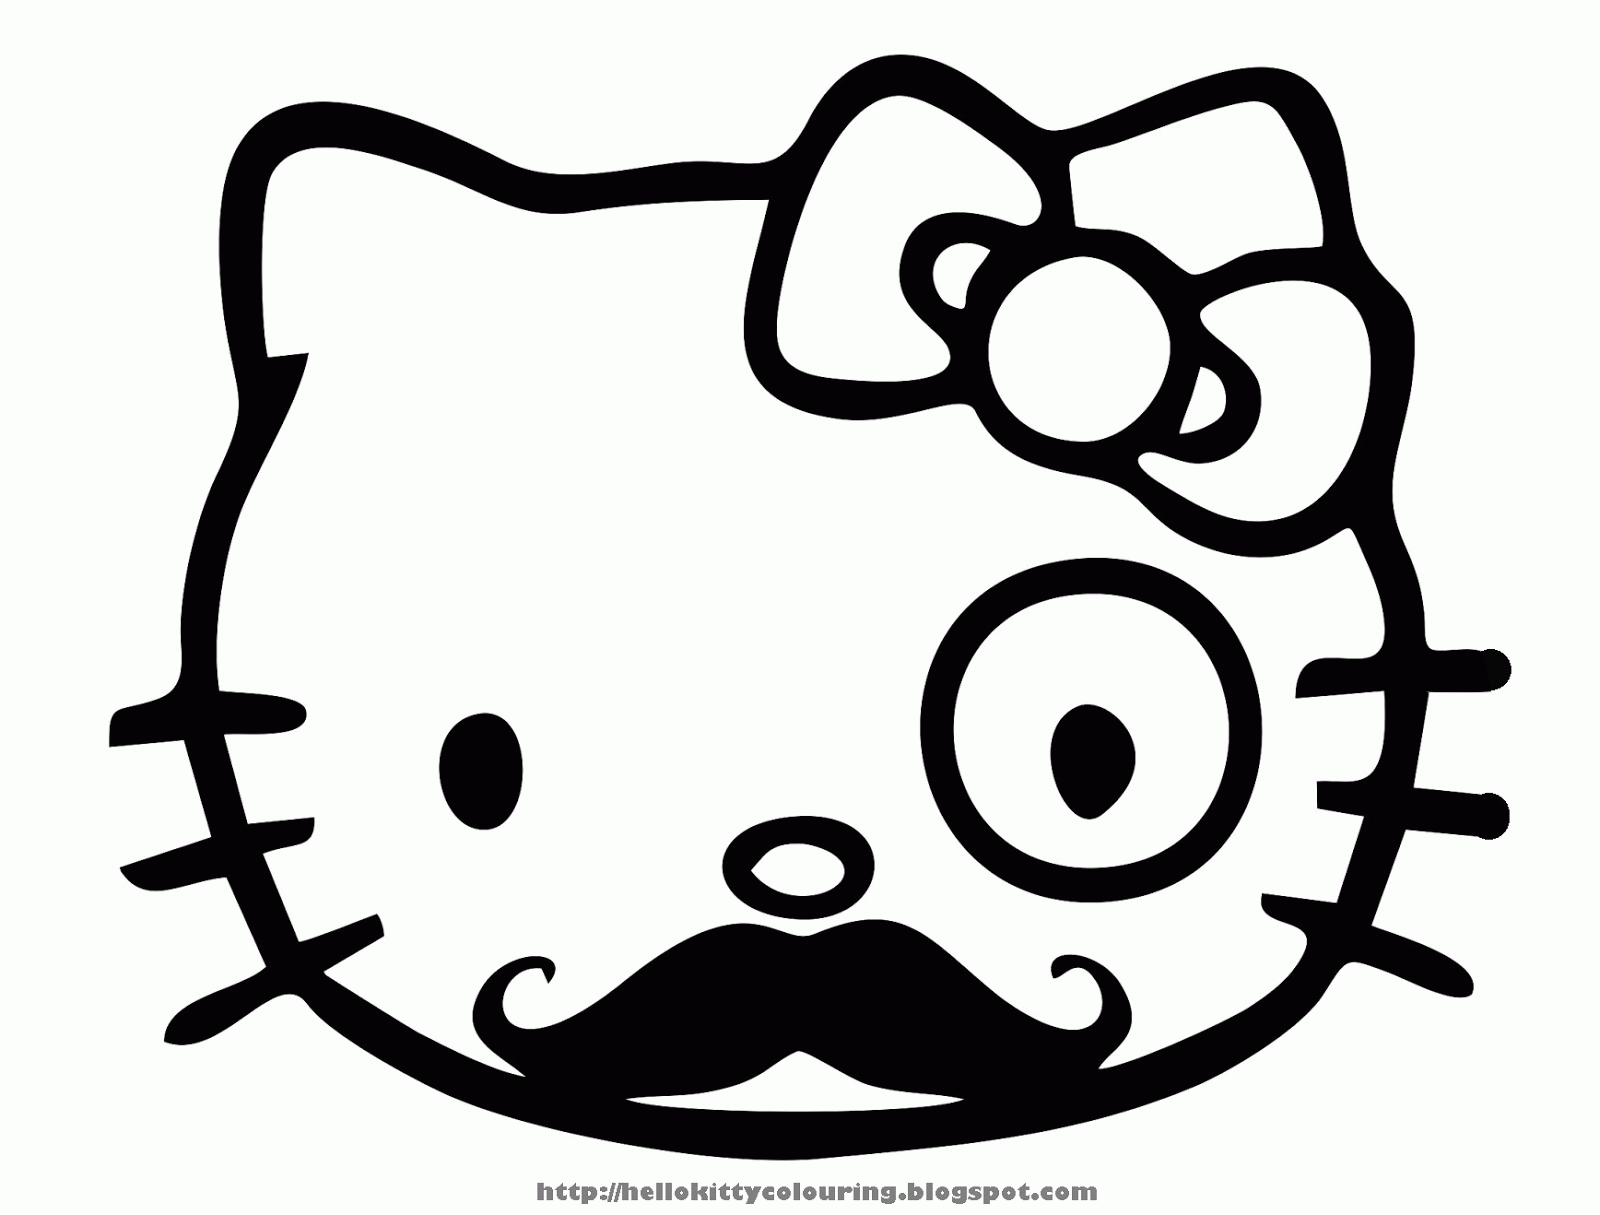 Hello Kitty Face Coloring Pages Printable - Colorine.net | #23482